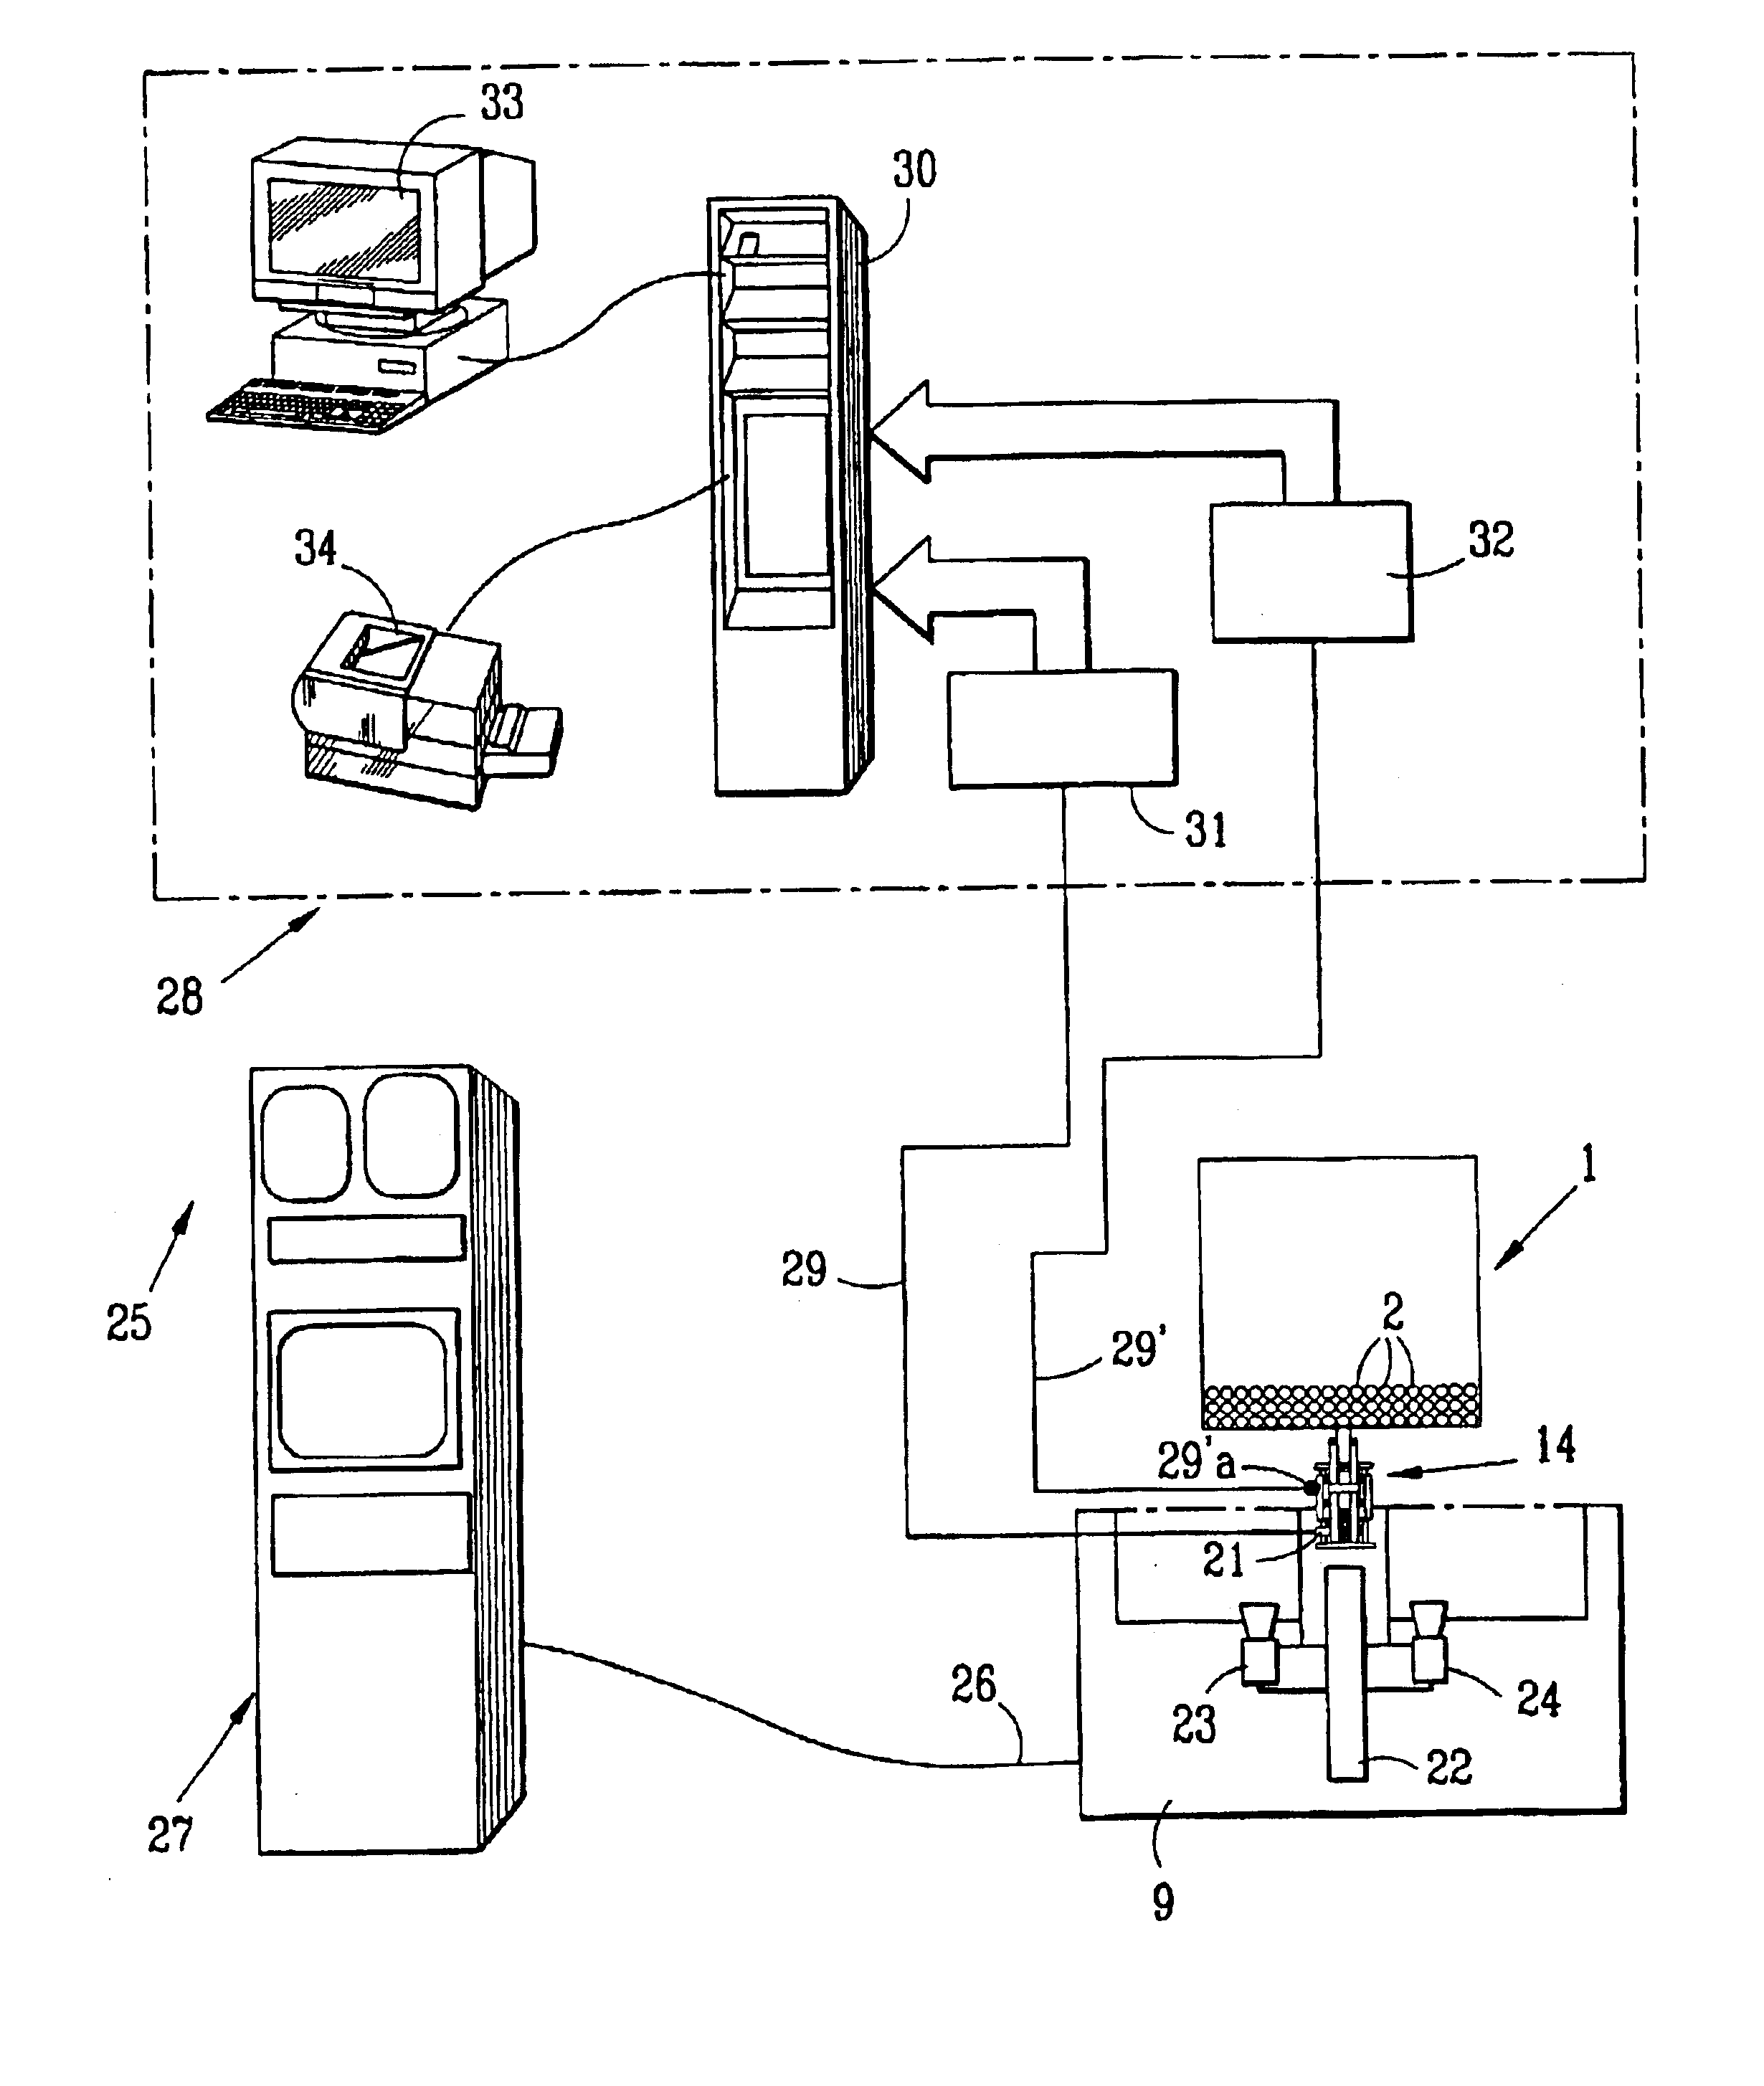 Method and device for measuring the diameter of a peripheral rod in a fuel assembly of a nuclear reactor